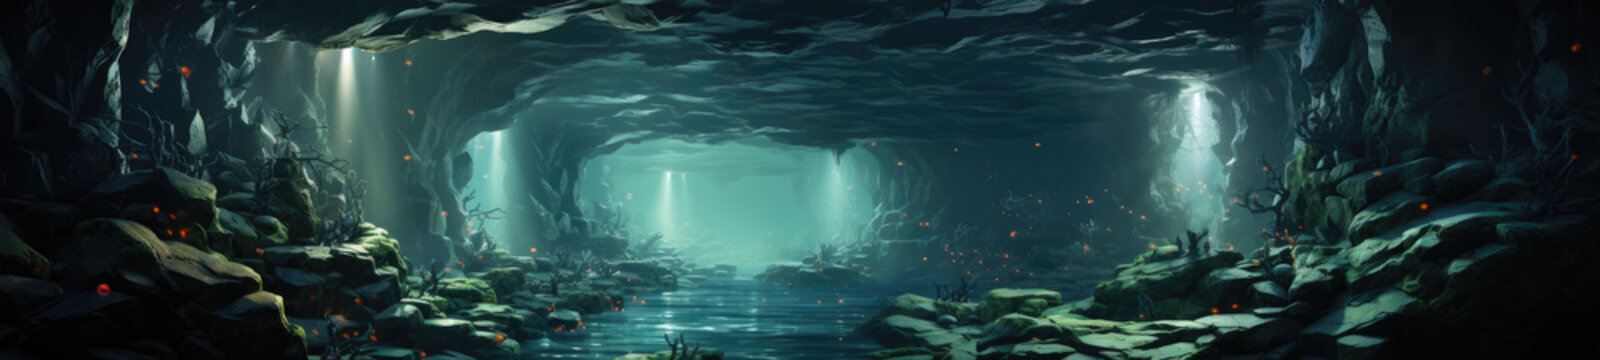 Explore the enigmatic depths of an underwater cave within a secret water creek, perfect for a unique wallpaper.